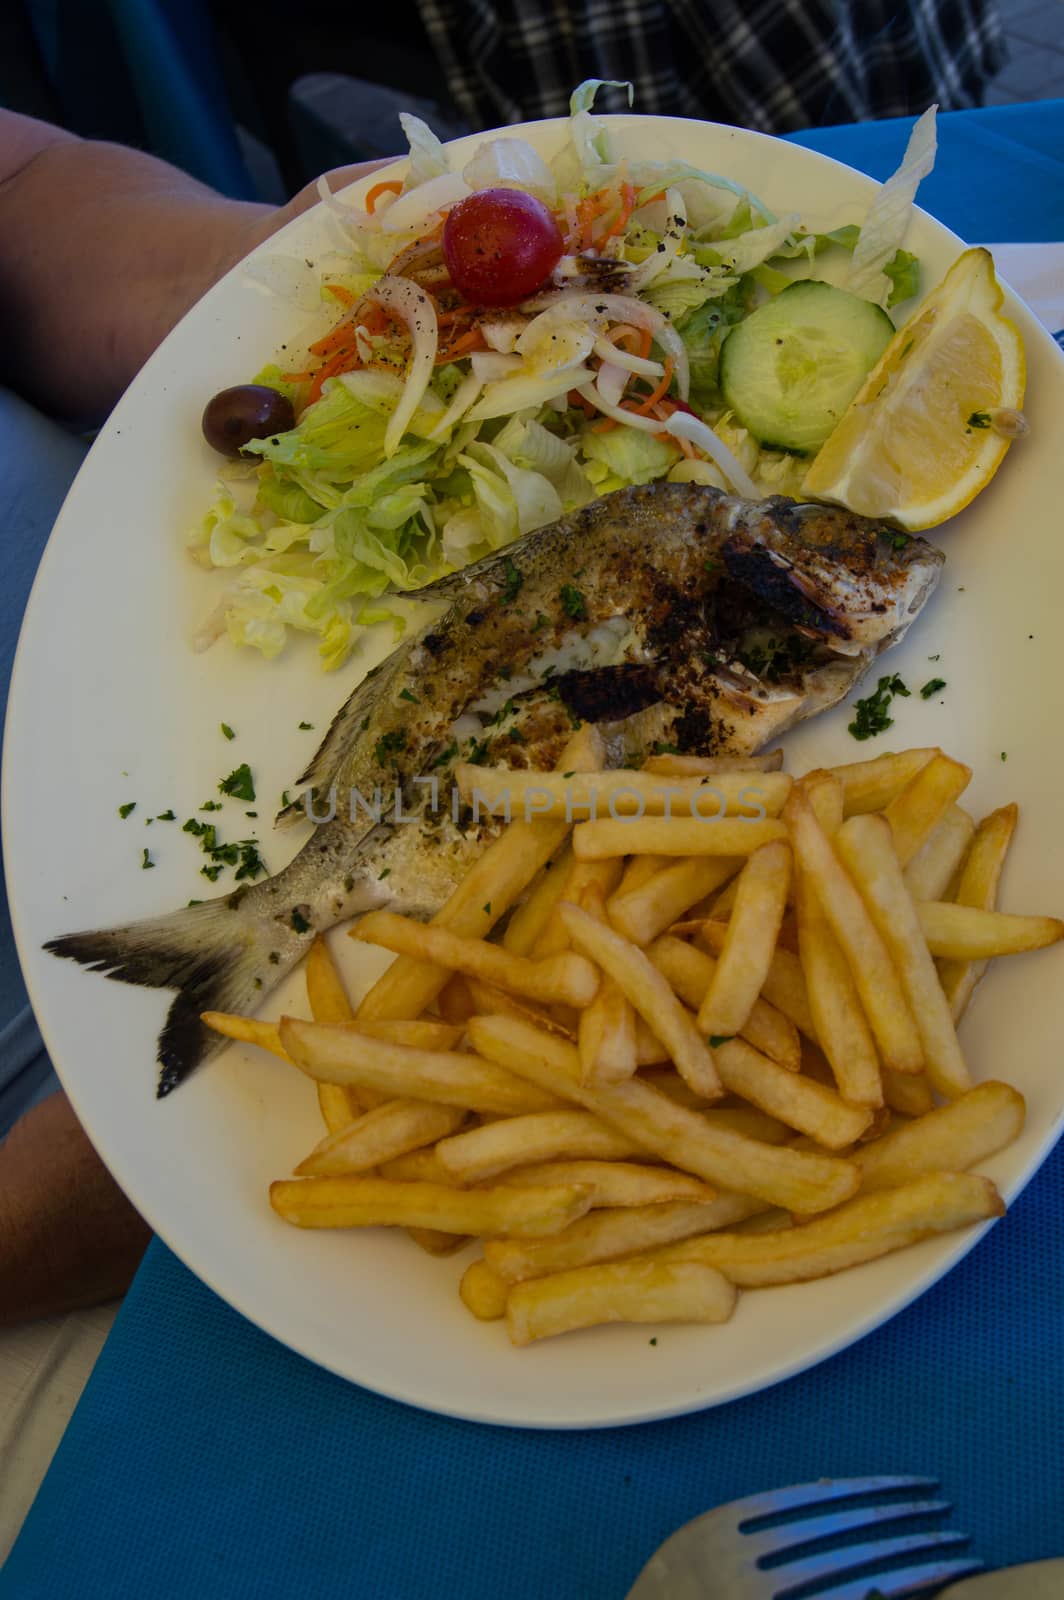 Fried fish with fries and small vegetables on a white plate in Malta